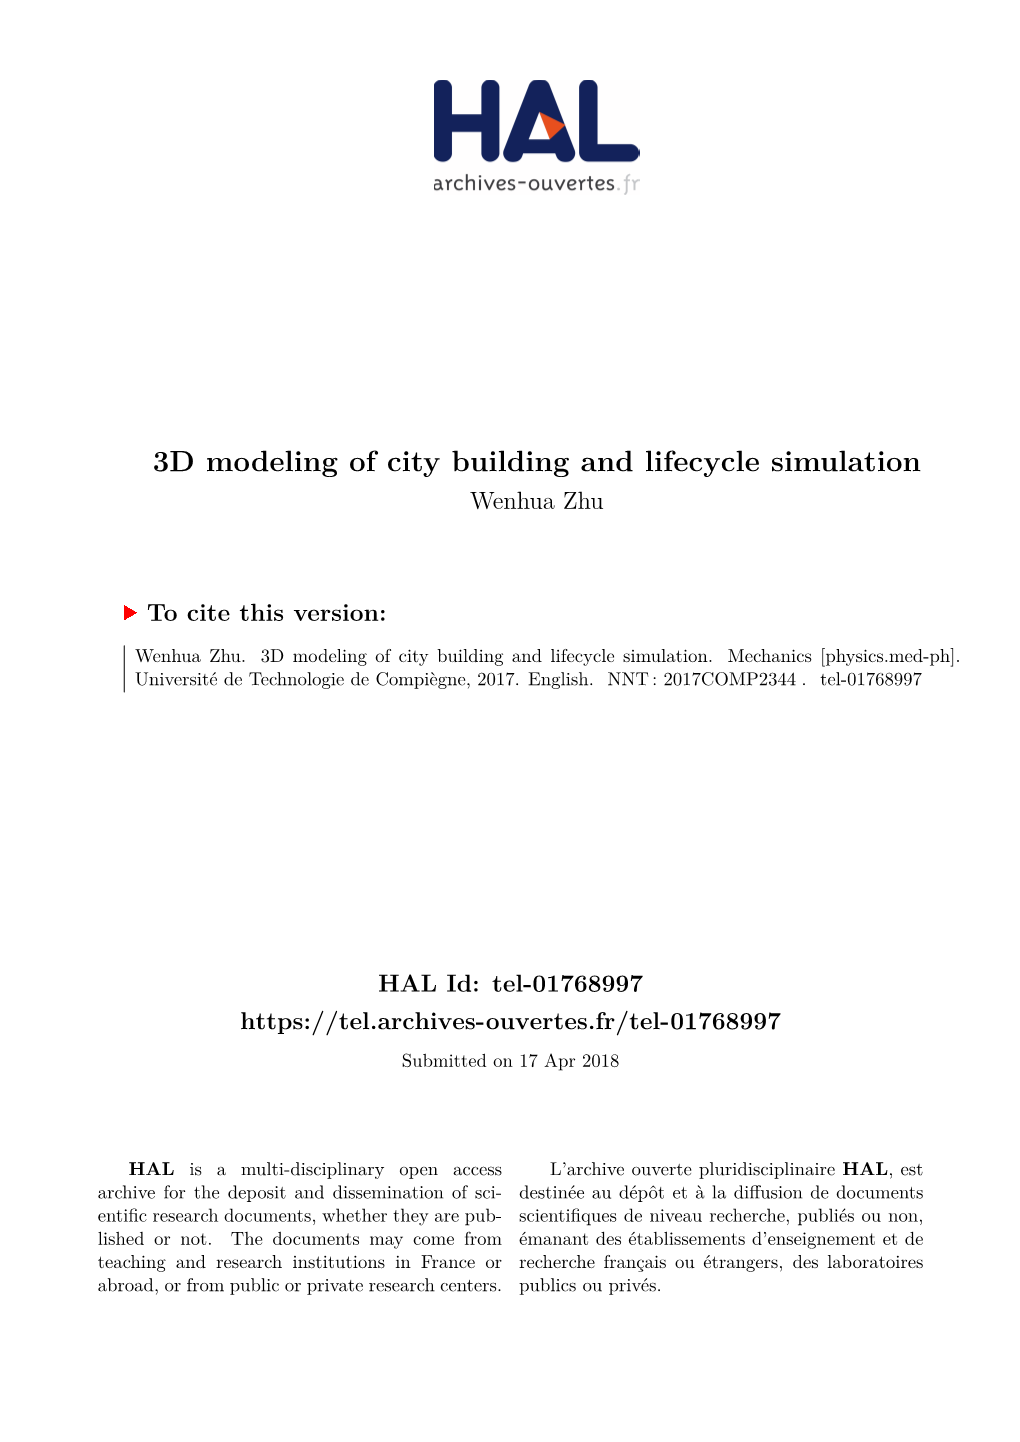 3D Modeling of City Building and Lifecycle Simulation Wenhua Zhu